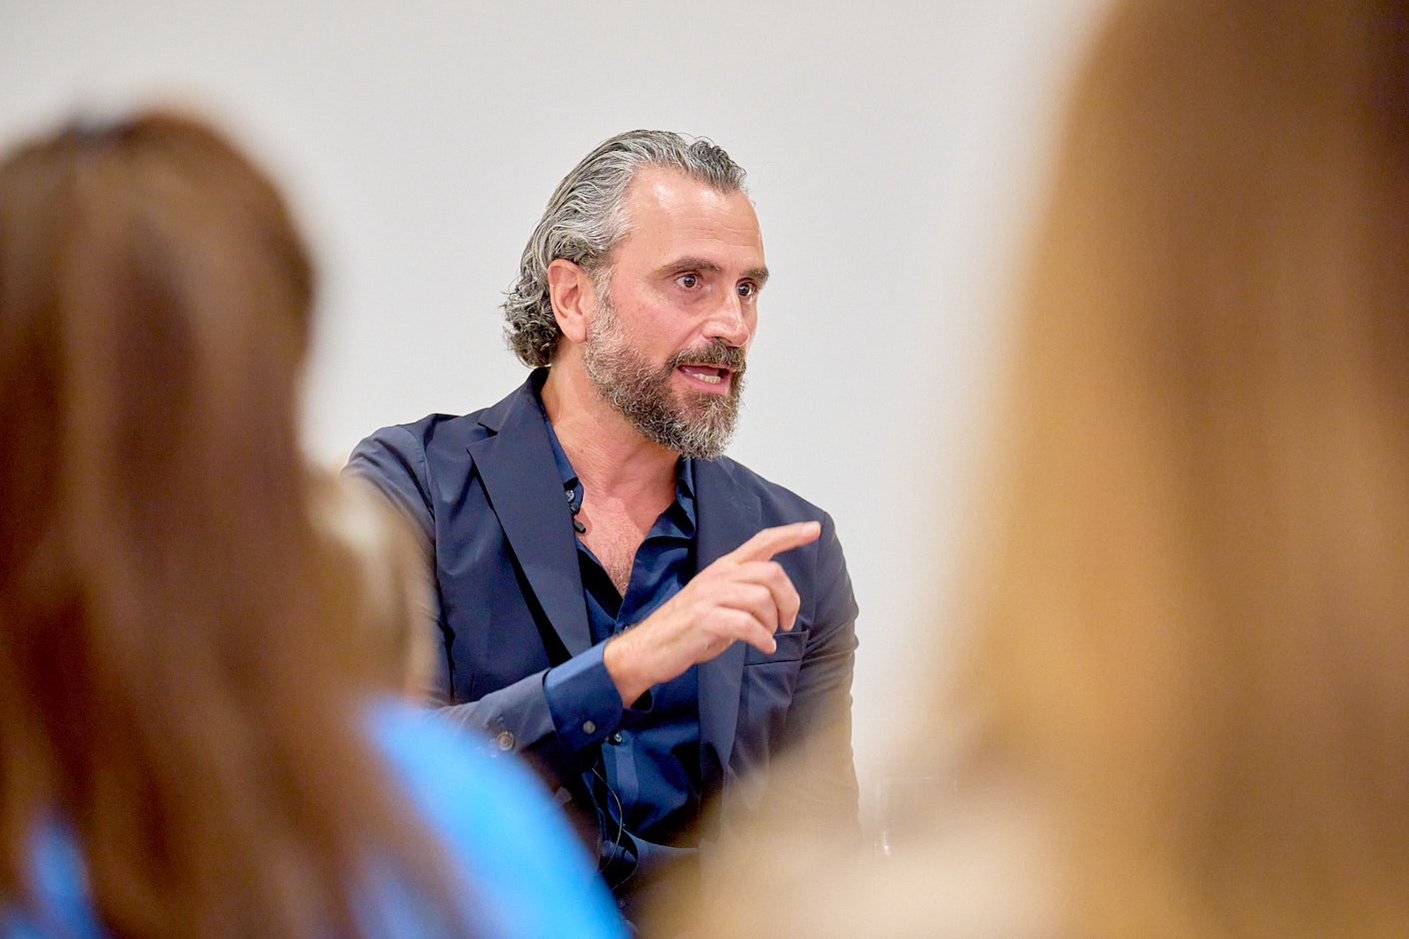 Alessandro Munge speaking to others in a networking event photographed by Josh Caius.